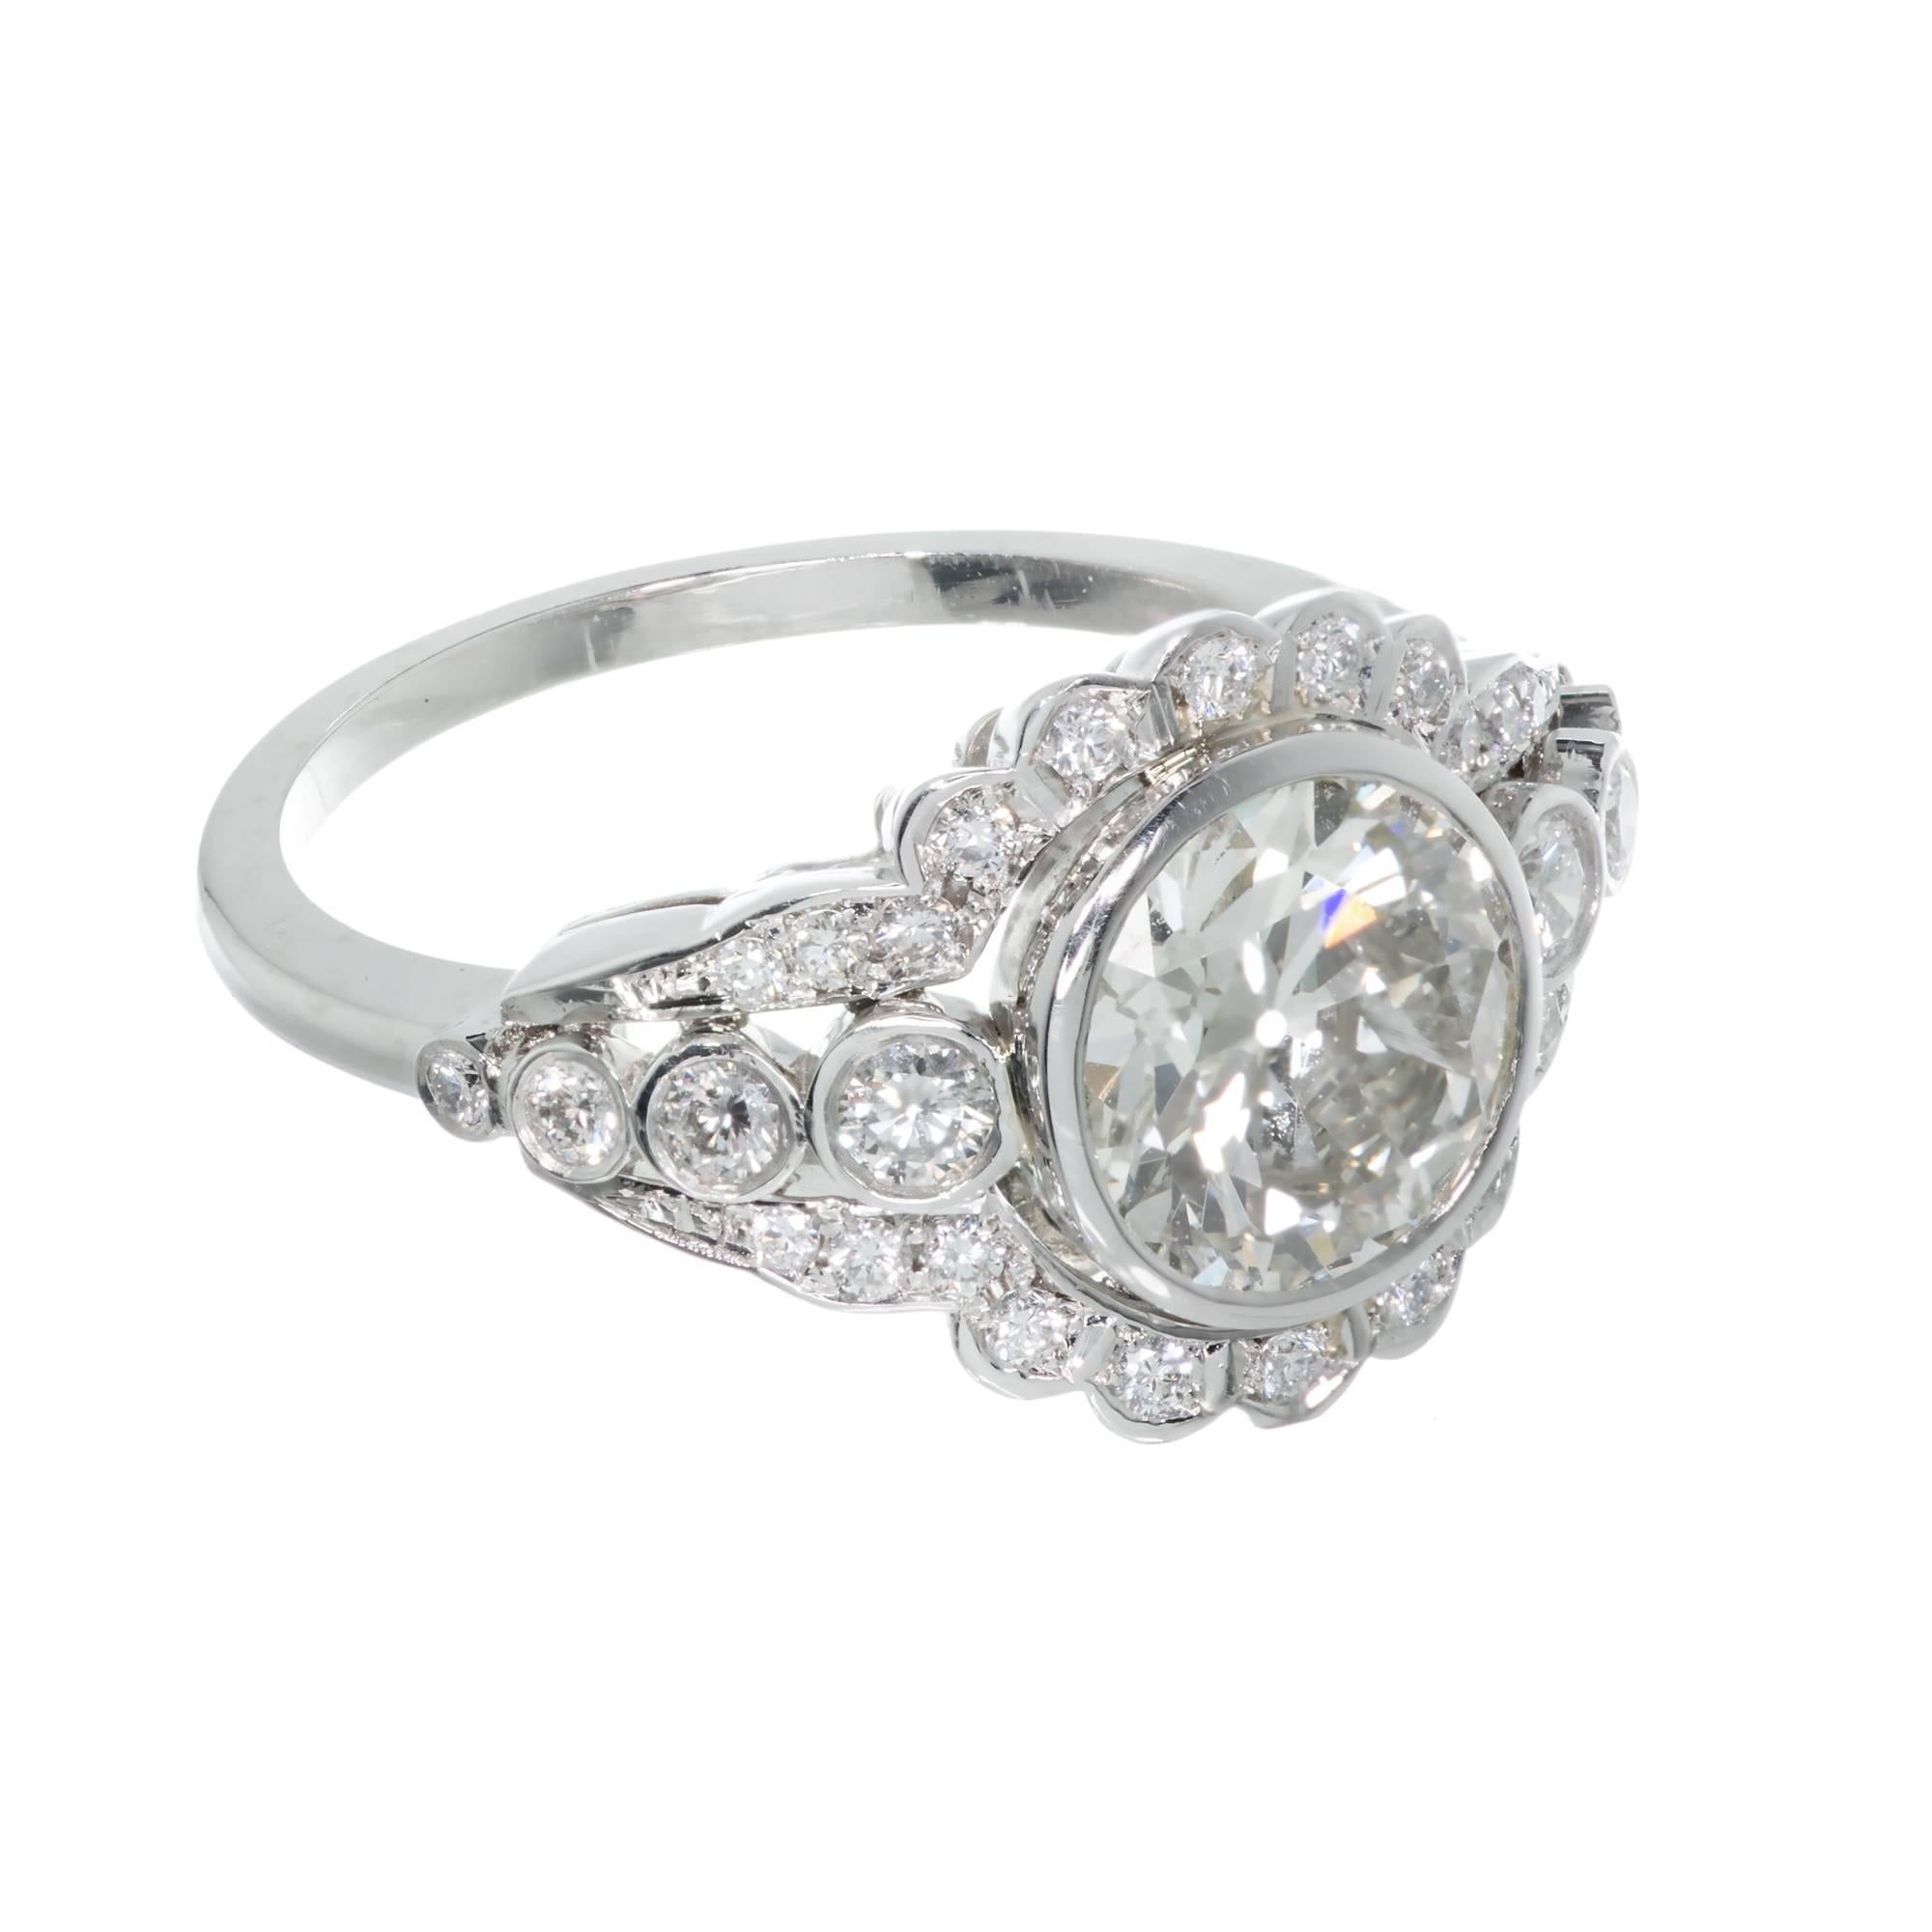 1930-1939 European cut 2.05ct original bezel set diamond halo engagement ring. 2.05 Old European cut center stone set in platinum with 30 round  diamond accents.

1 round old euro diamond, approx. total weight 2.05cts, K – L, I1, 
30 round diamonds,